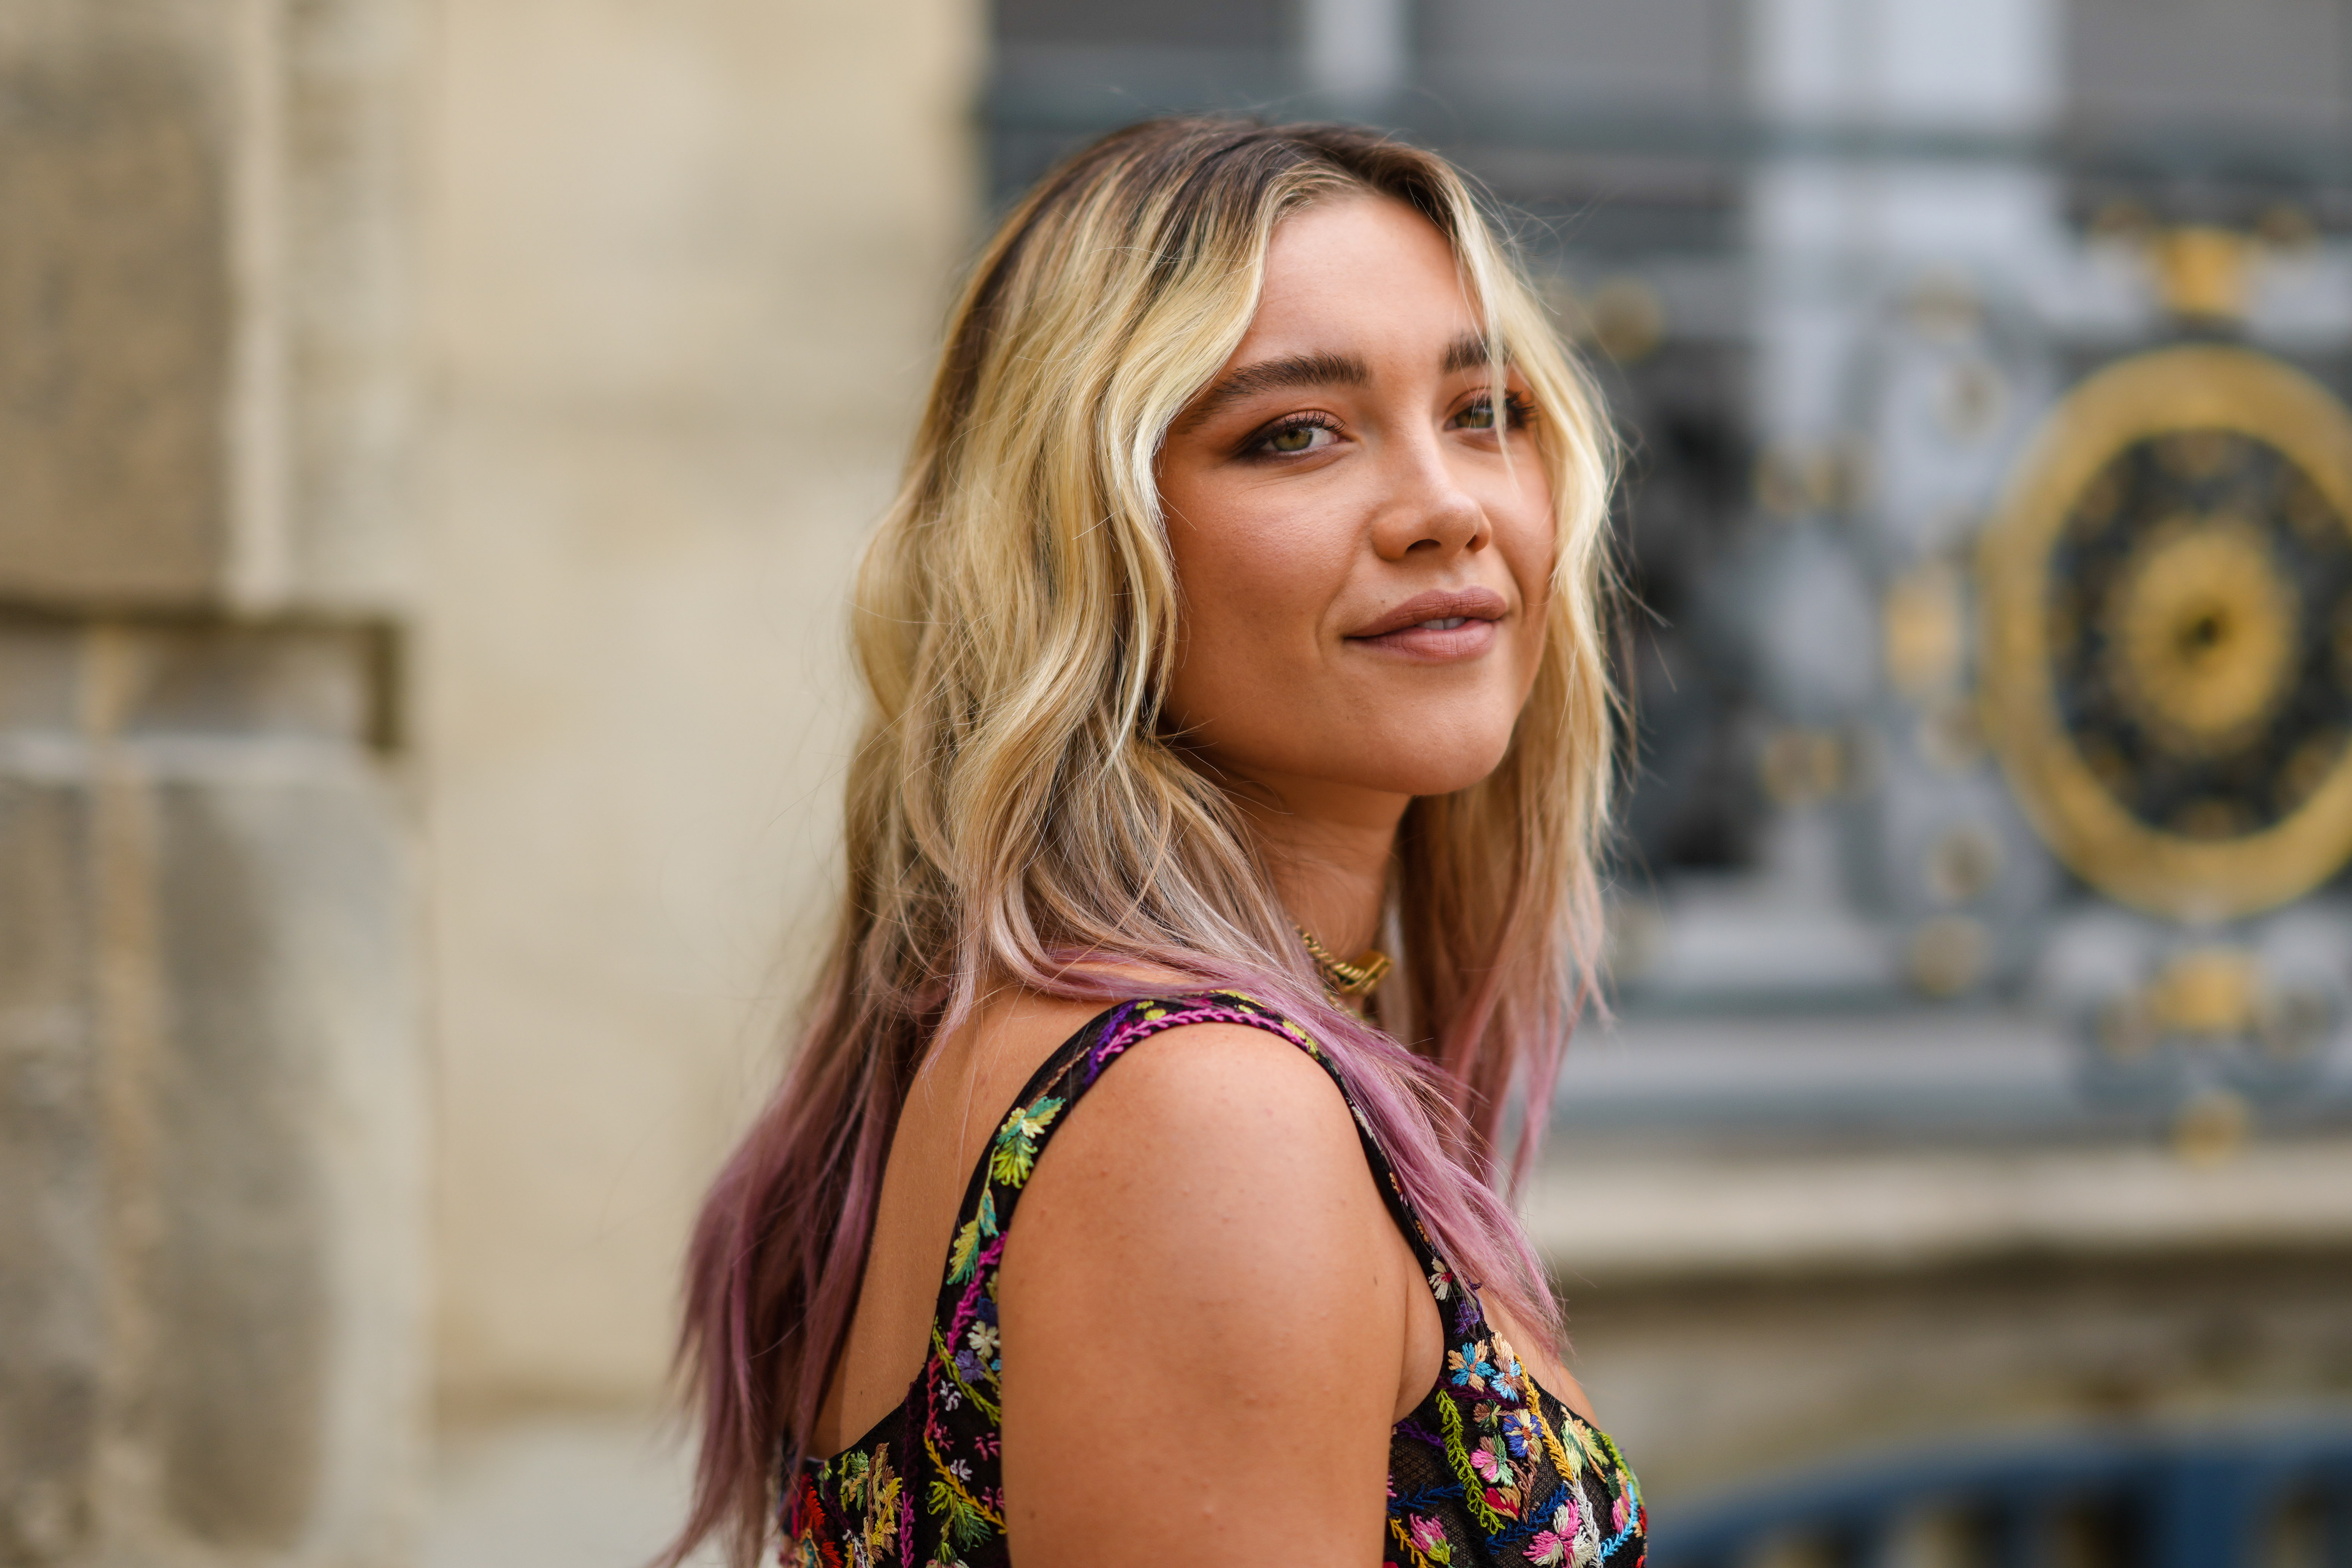 'Hawkeye' star Florence Pugh, who plays Yelena Belova in the show, wears a multi-colored floral tank top. Her hair is dyed purple at the ends.